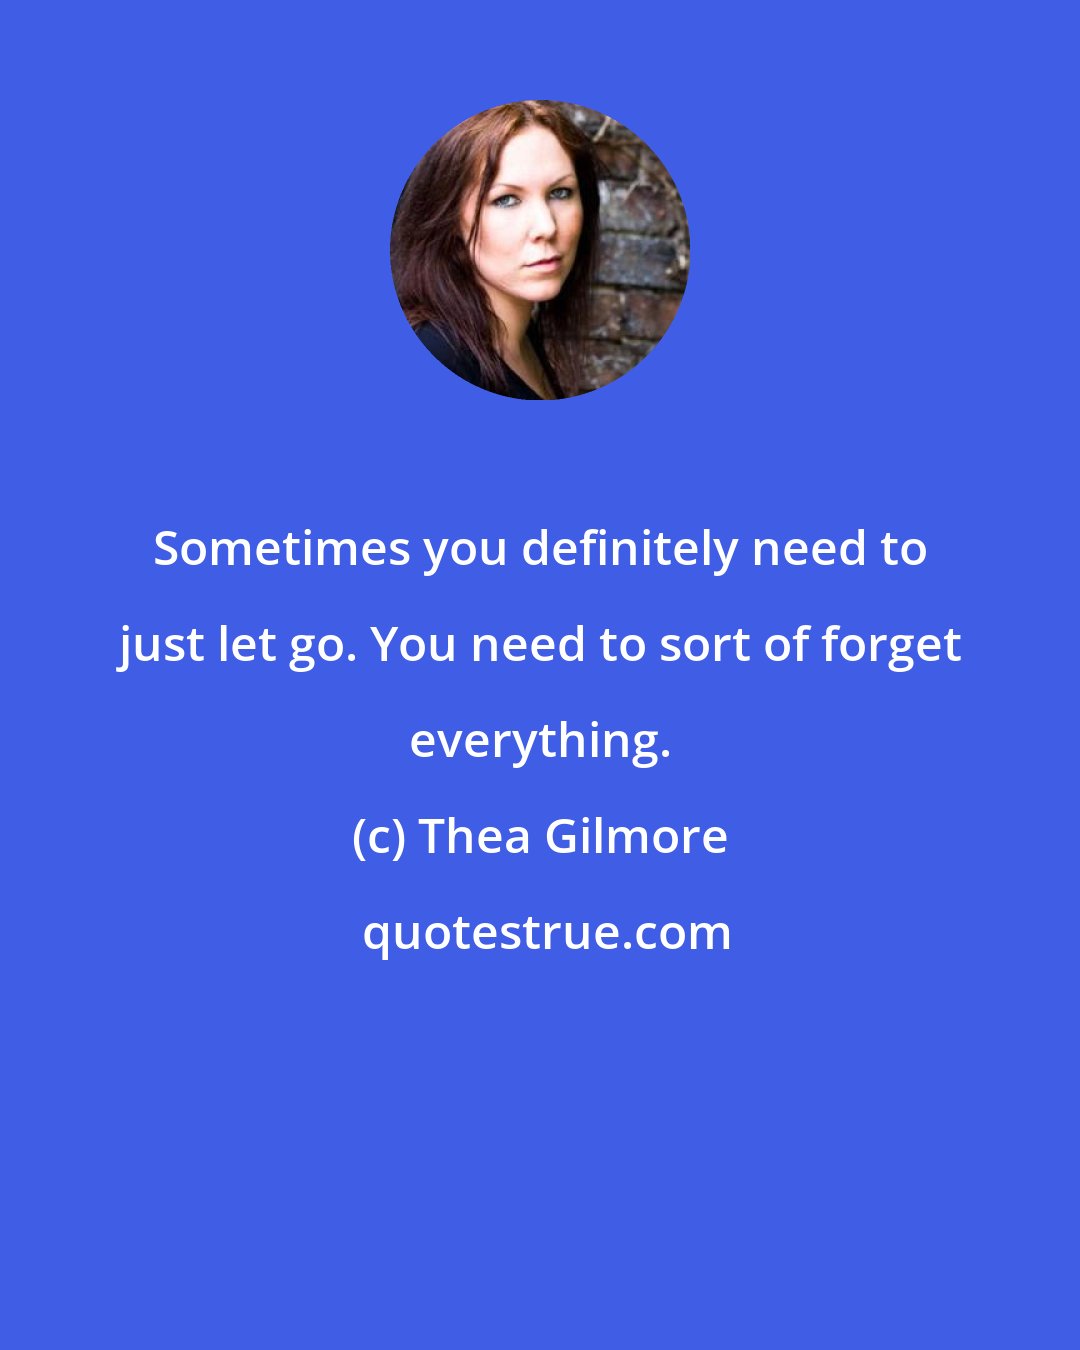 Thea Gilmore: Sometimes you definitely need to just let go. You need to sort of forget everything.